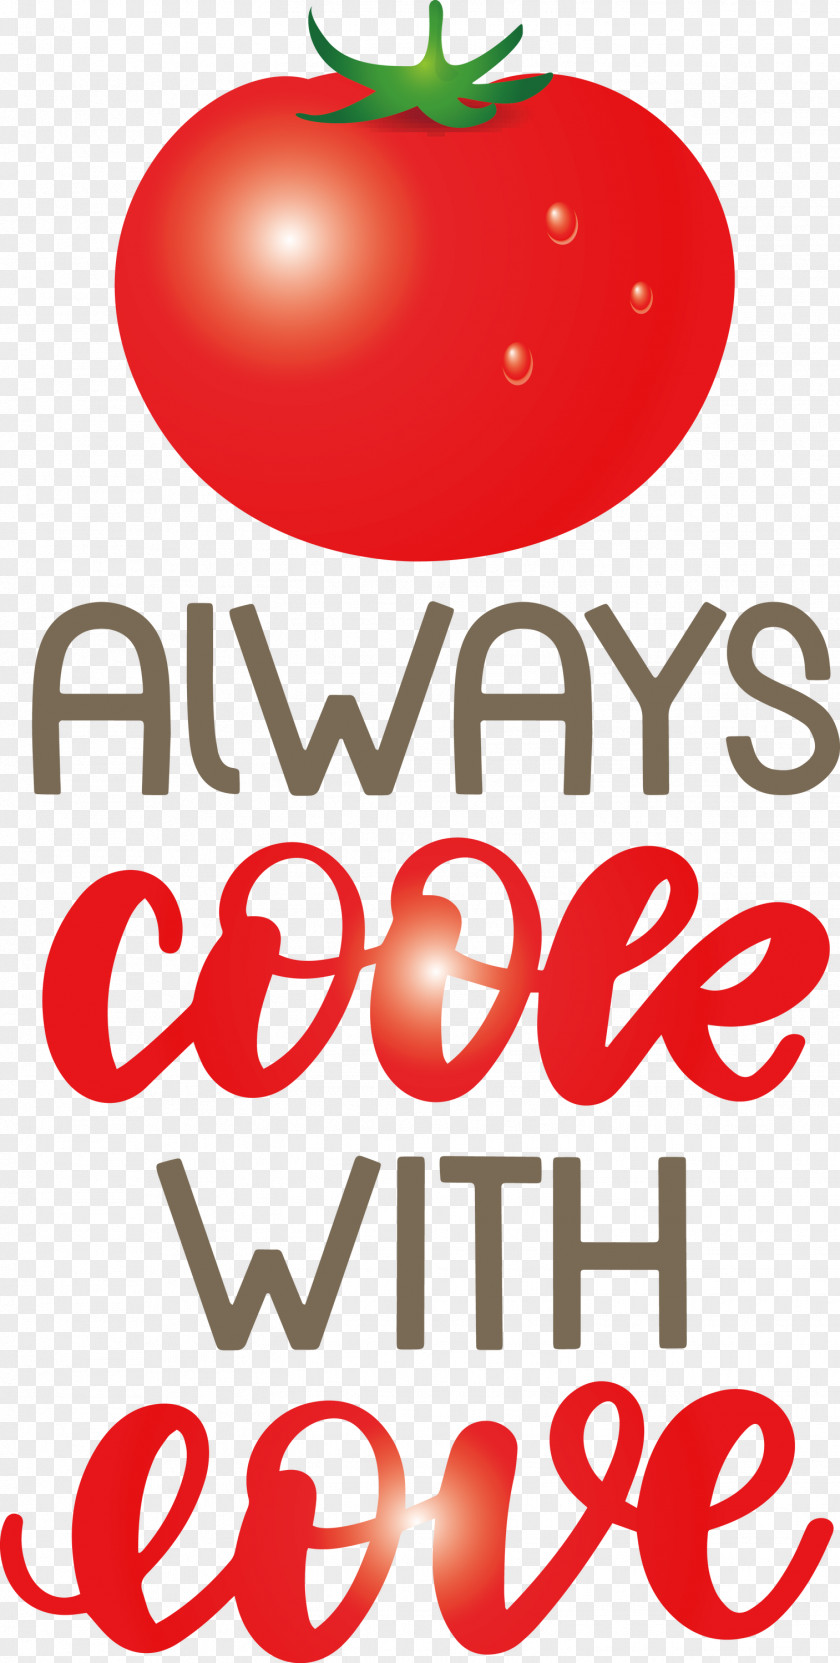 Always Cook With Love Food Kitchen PNG